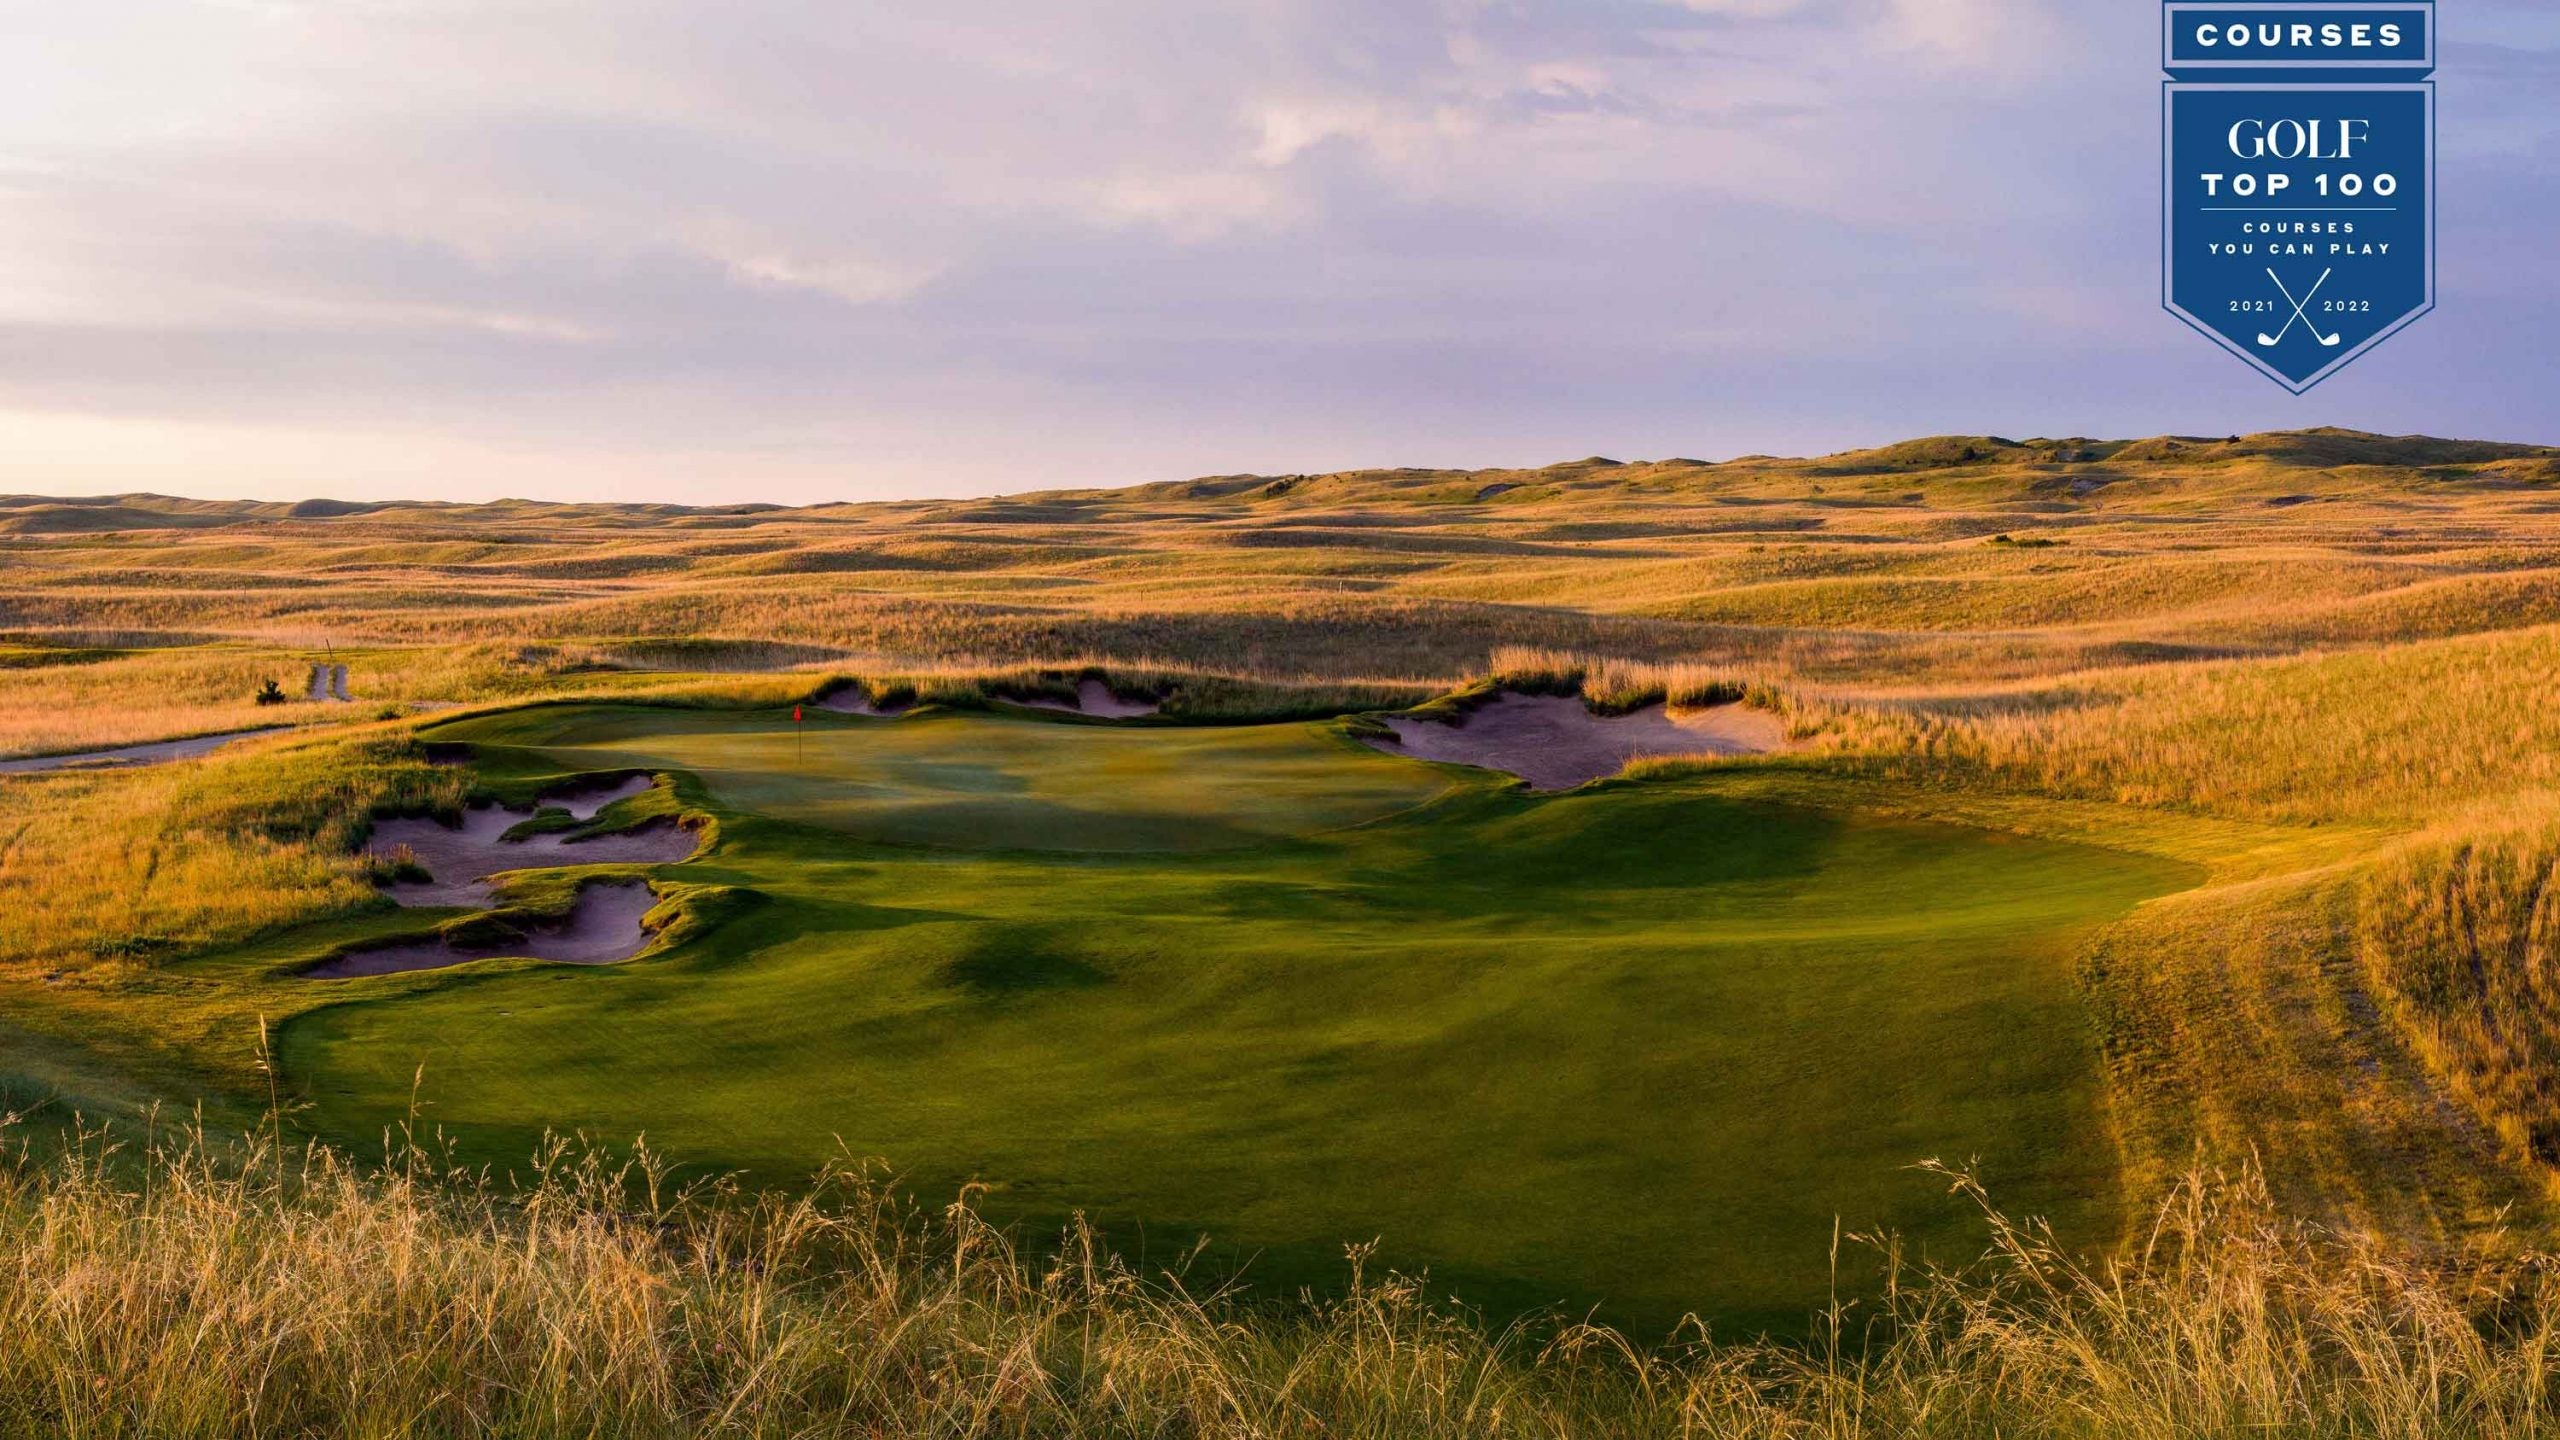 Best public golf courses 2021-22: GOLF's Top 100 Courses You Can Play